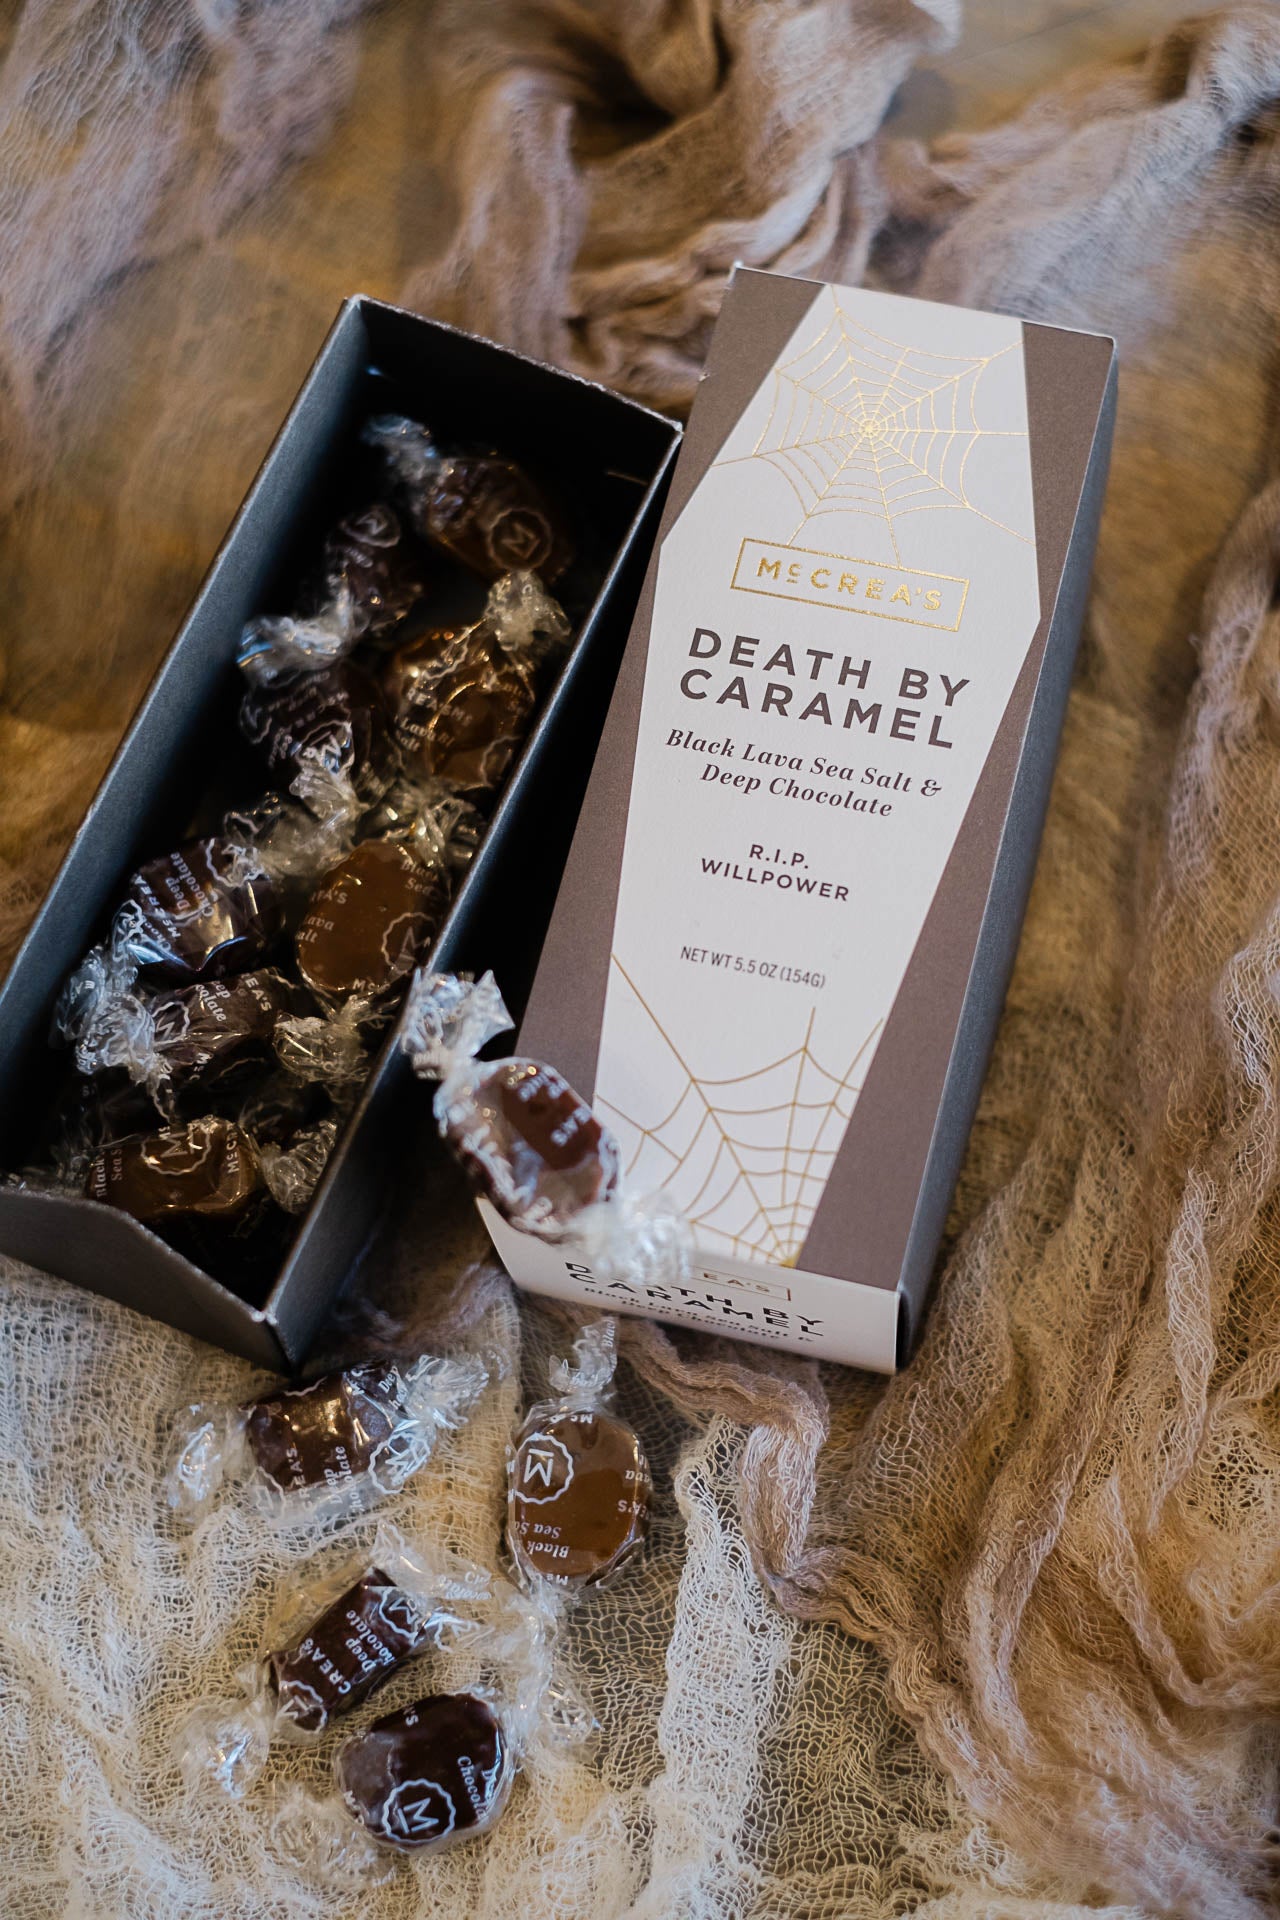 McCreas Hand Crafted Caramels Death by Caramel